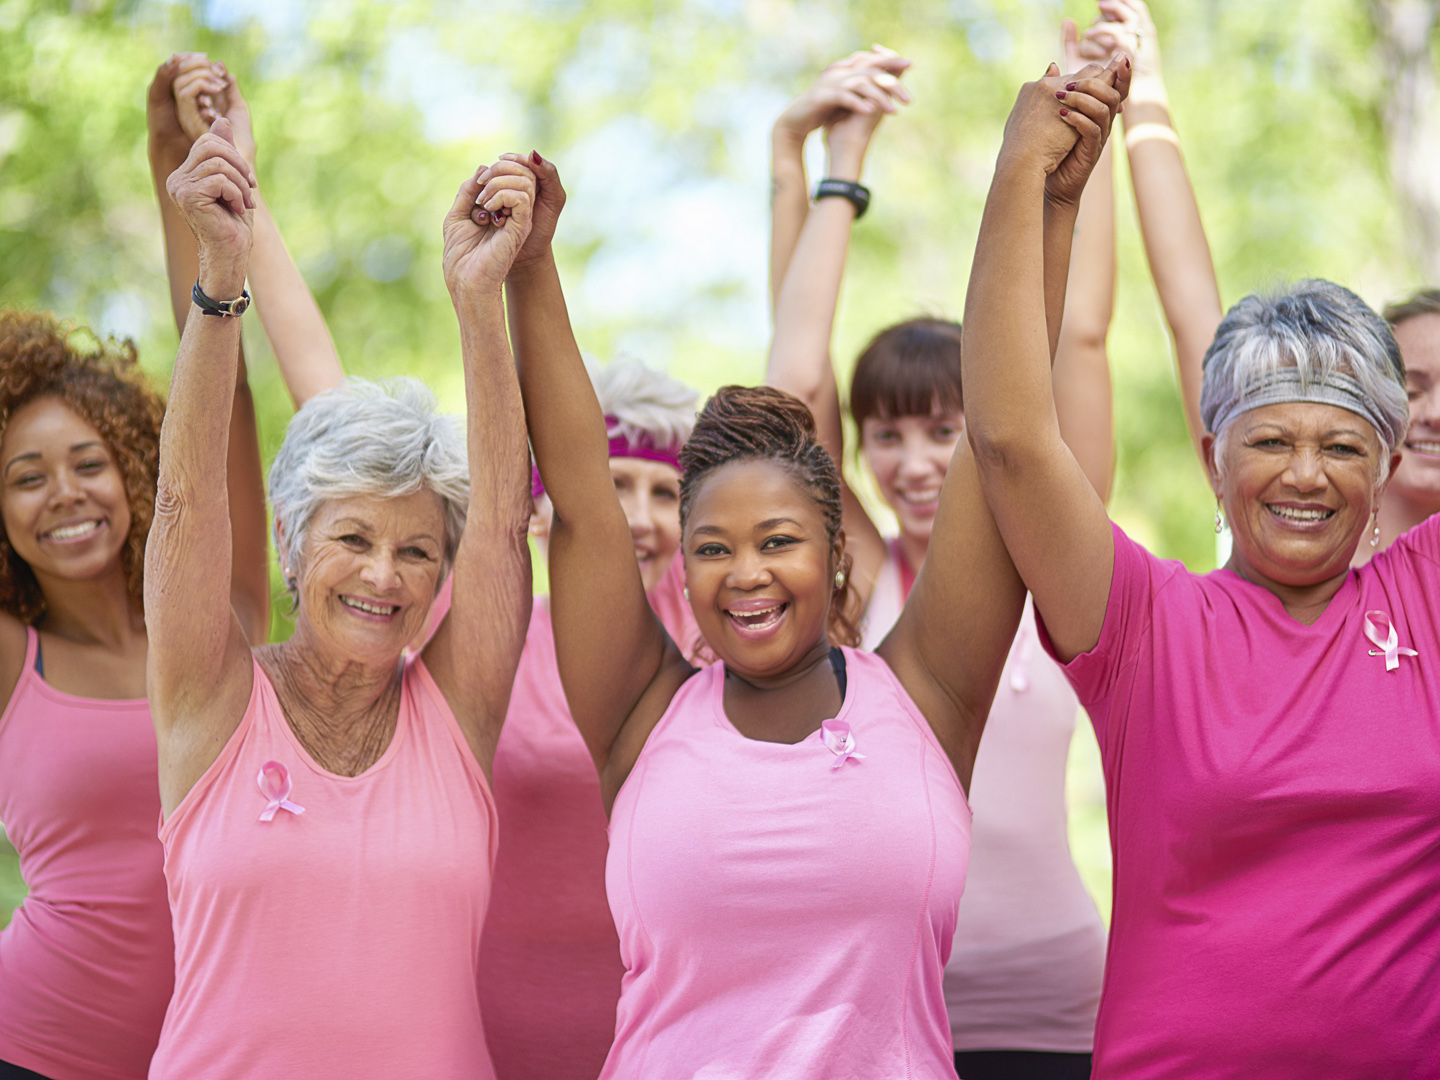 Portrait of a group of enthusiastic woman taking part in a fitness event to raise awareness for breast cancer